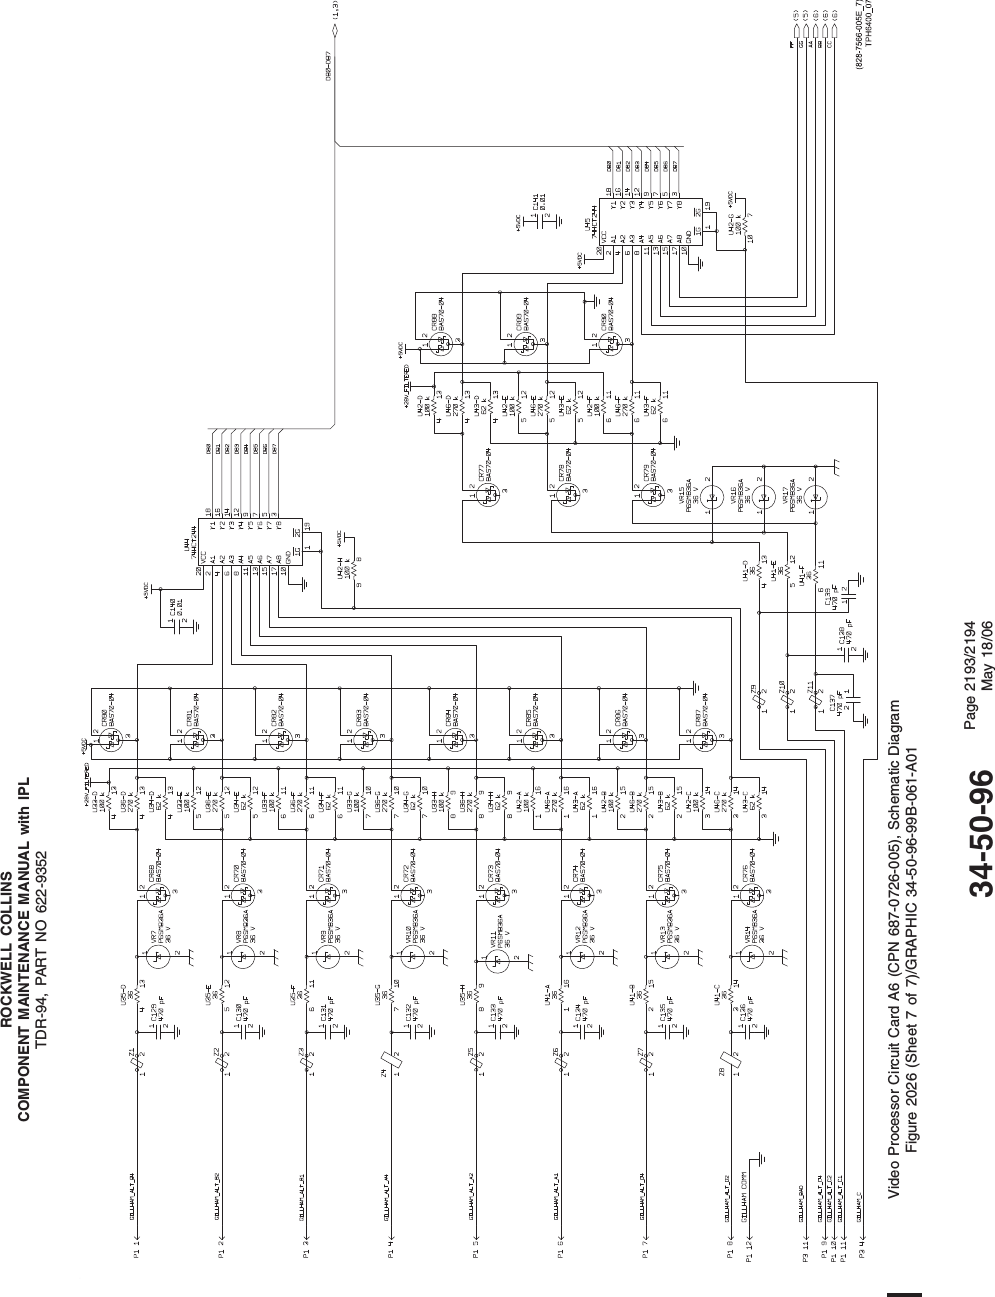 ROCKWELL COLLINSCOMPONENT MAINTENANCE MANUAL with IPLTDR-94, PART NO 622-9352Video Processor Circuit Card A6 (CPN 687-0726-005), Schematic DiagramFigure 2026 (Sheet 7 of 7)/GRAPHIC 34-50-96-99B-061-A0134-50-96 Page 2193/2194May 18/06